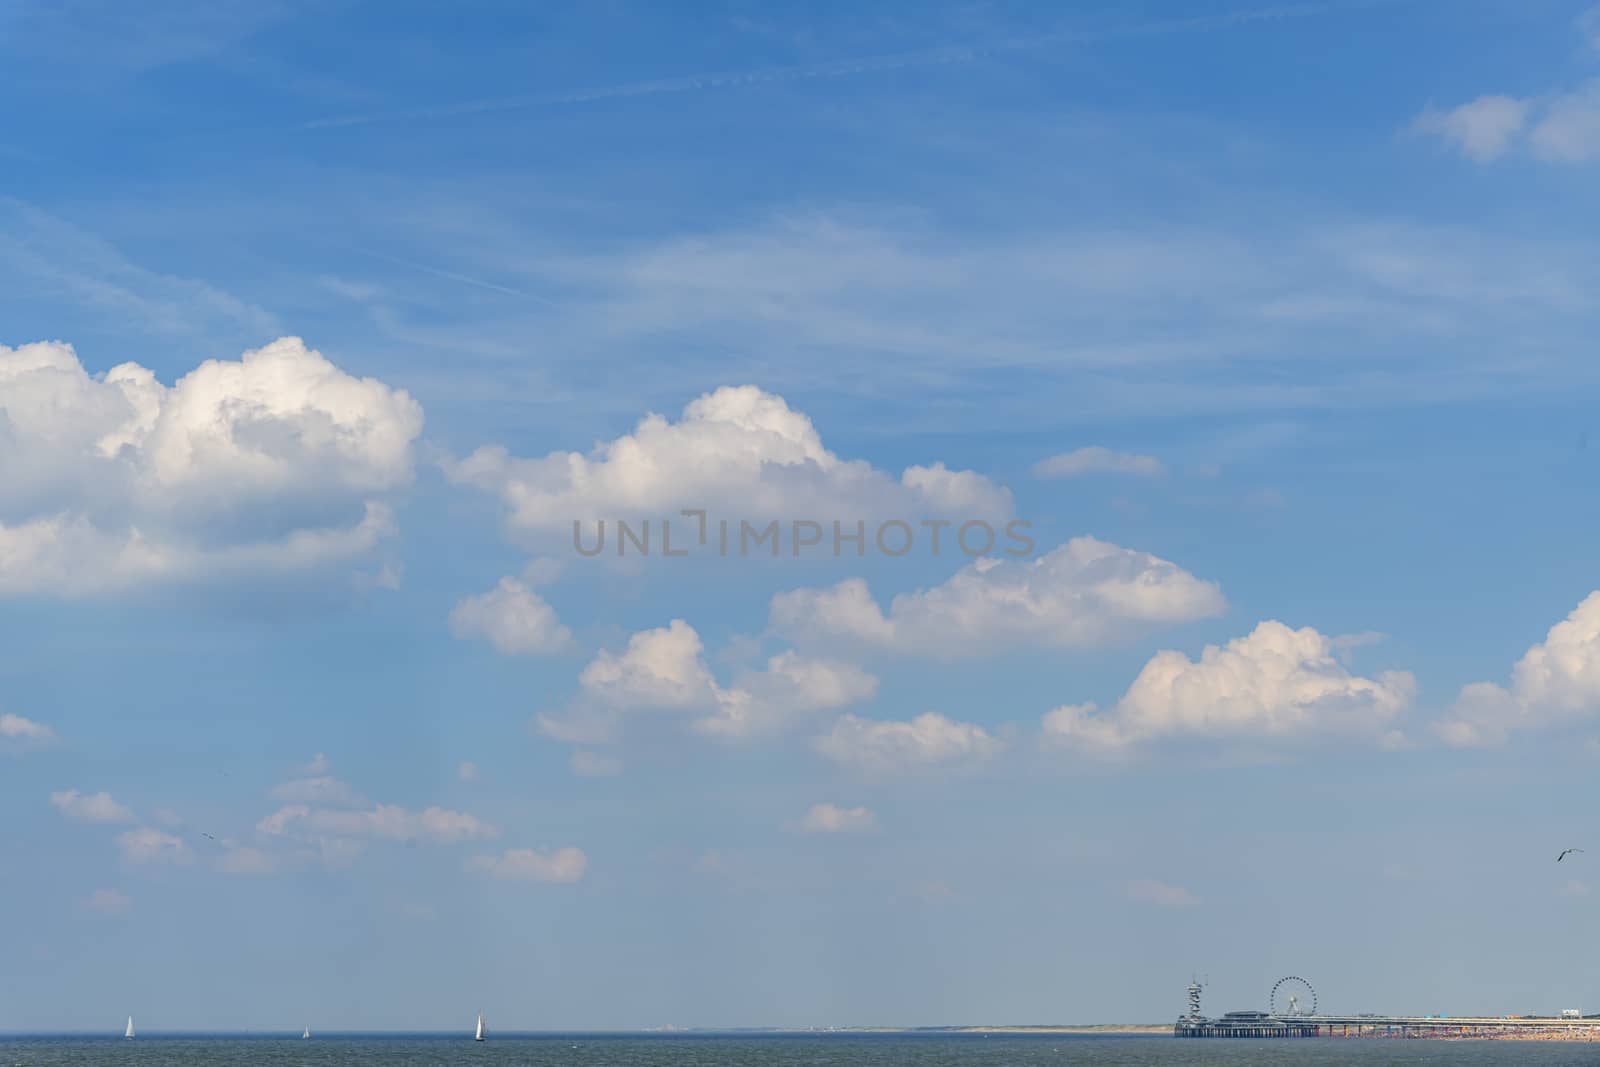 View of the beginning of the cumulonimbus clouds during the warm and wet weather with thick fog at the horizon and the sea side full of tall ships, Scheveningen, Netherlands by ankorlight